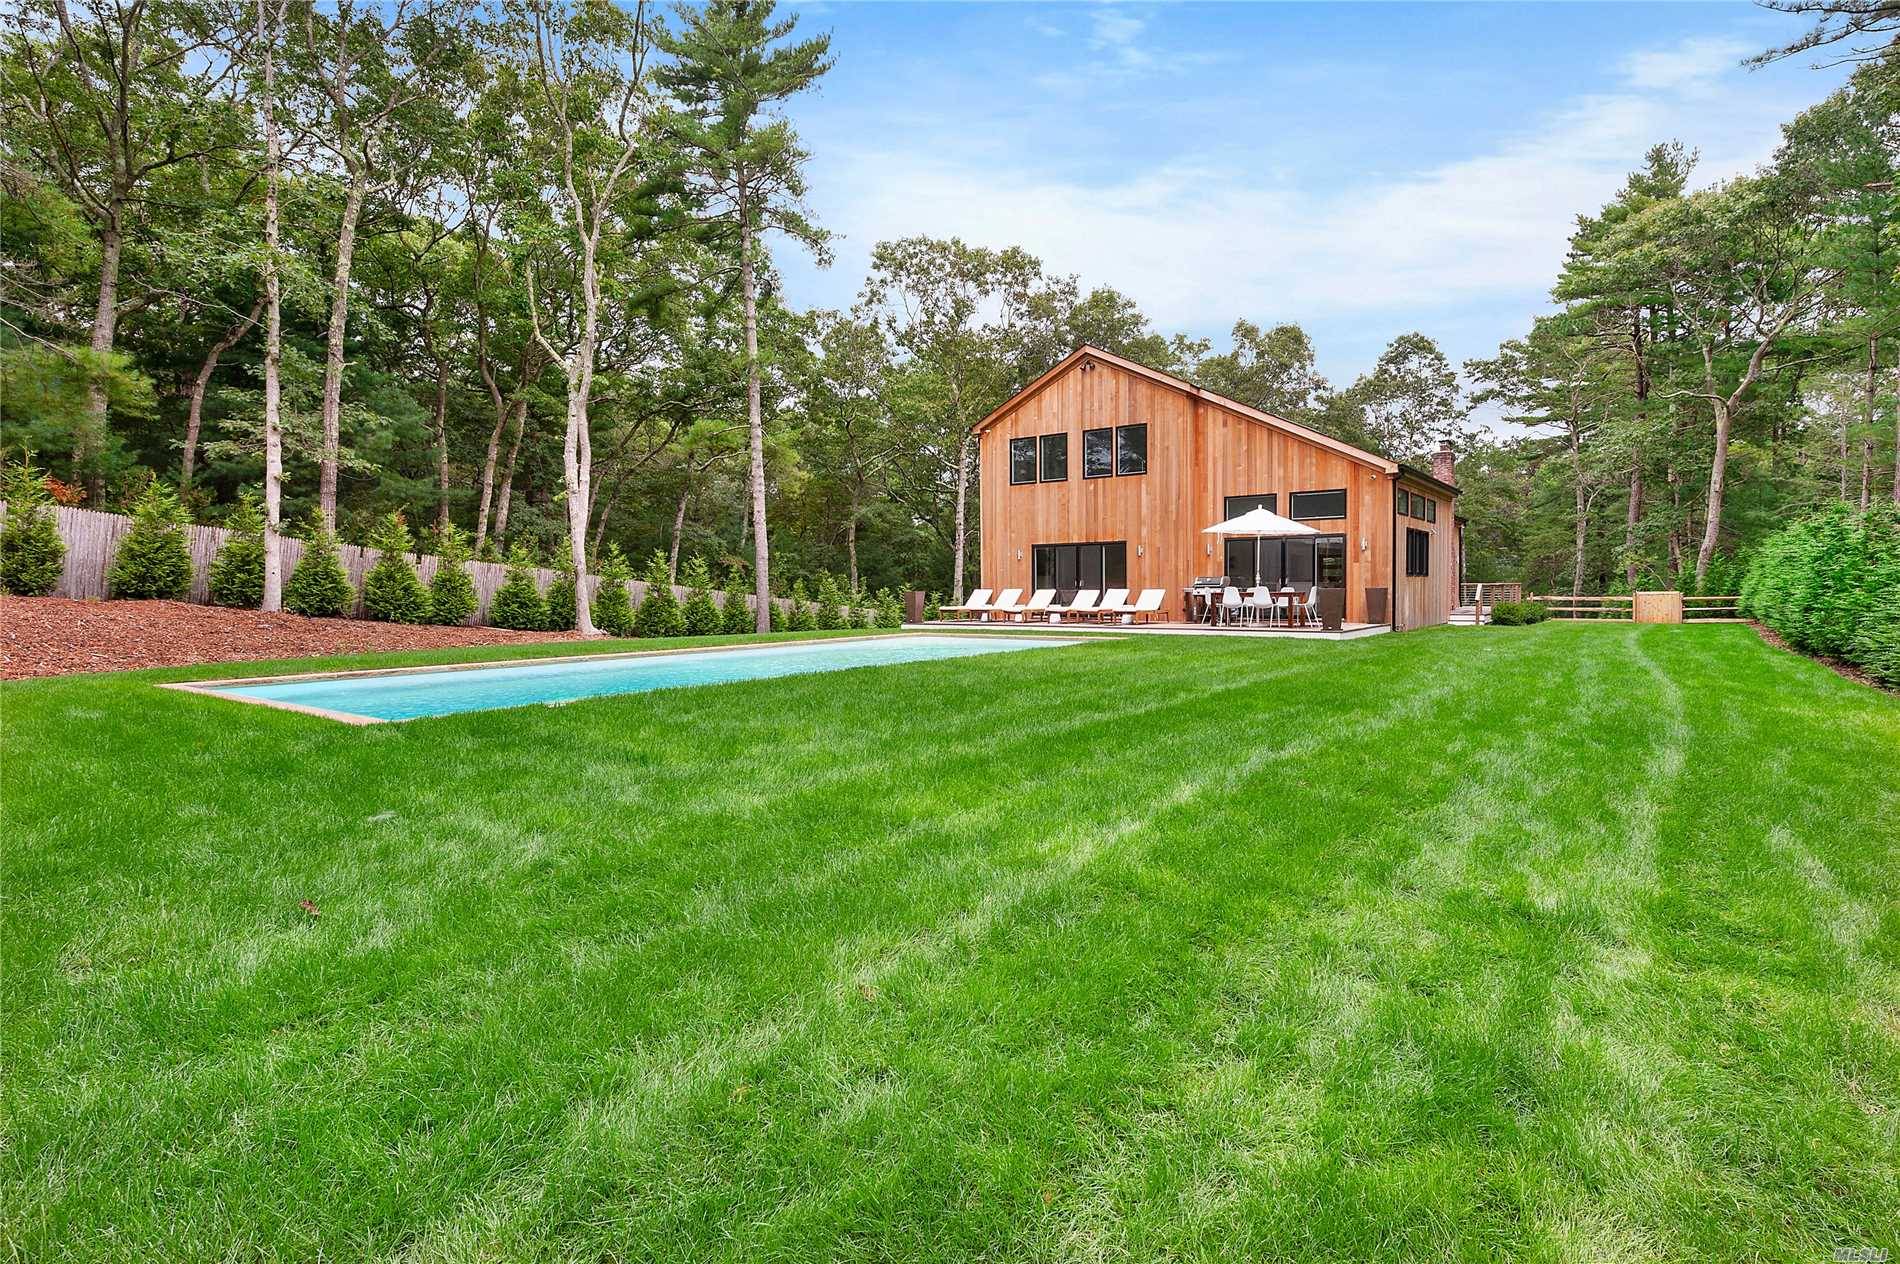 Located Just Outside The Village Of East Hampton Is This Newly Renovated Home On 2 Acres.